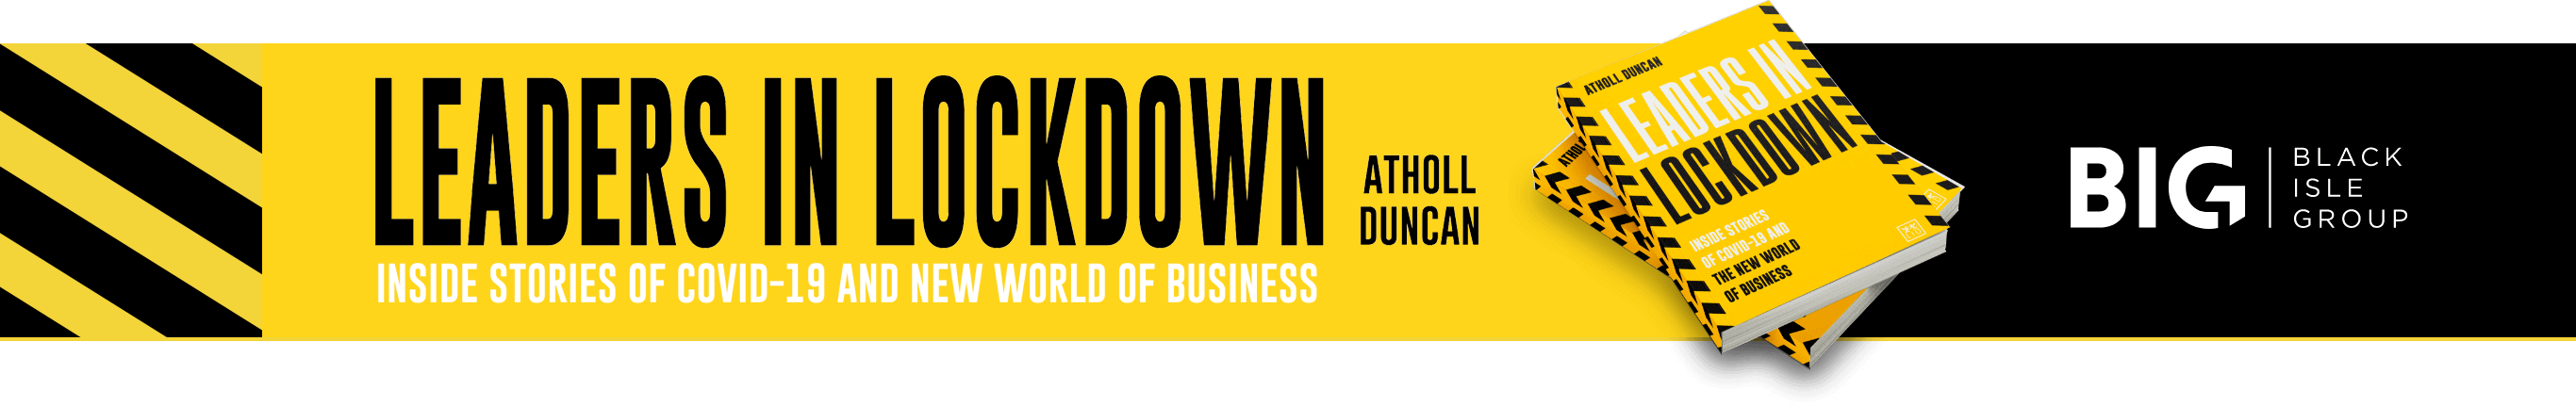 Leaders in Lockdown by Atholl Duncan - Inside stories of COVID 19 and new world of business